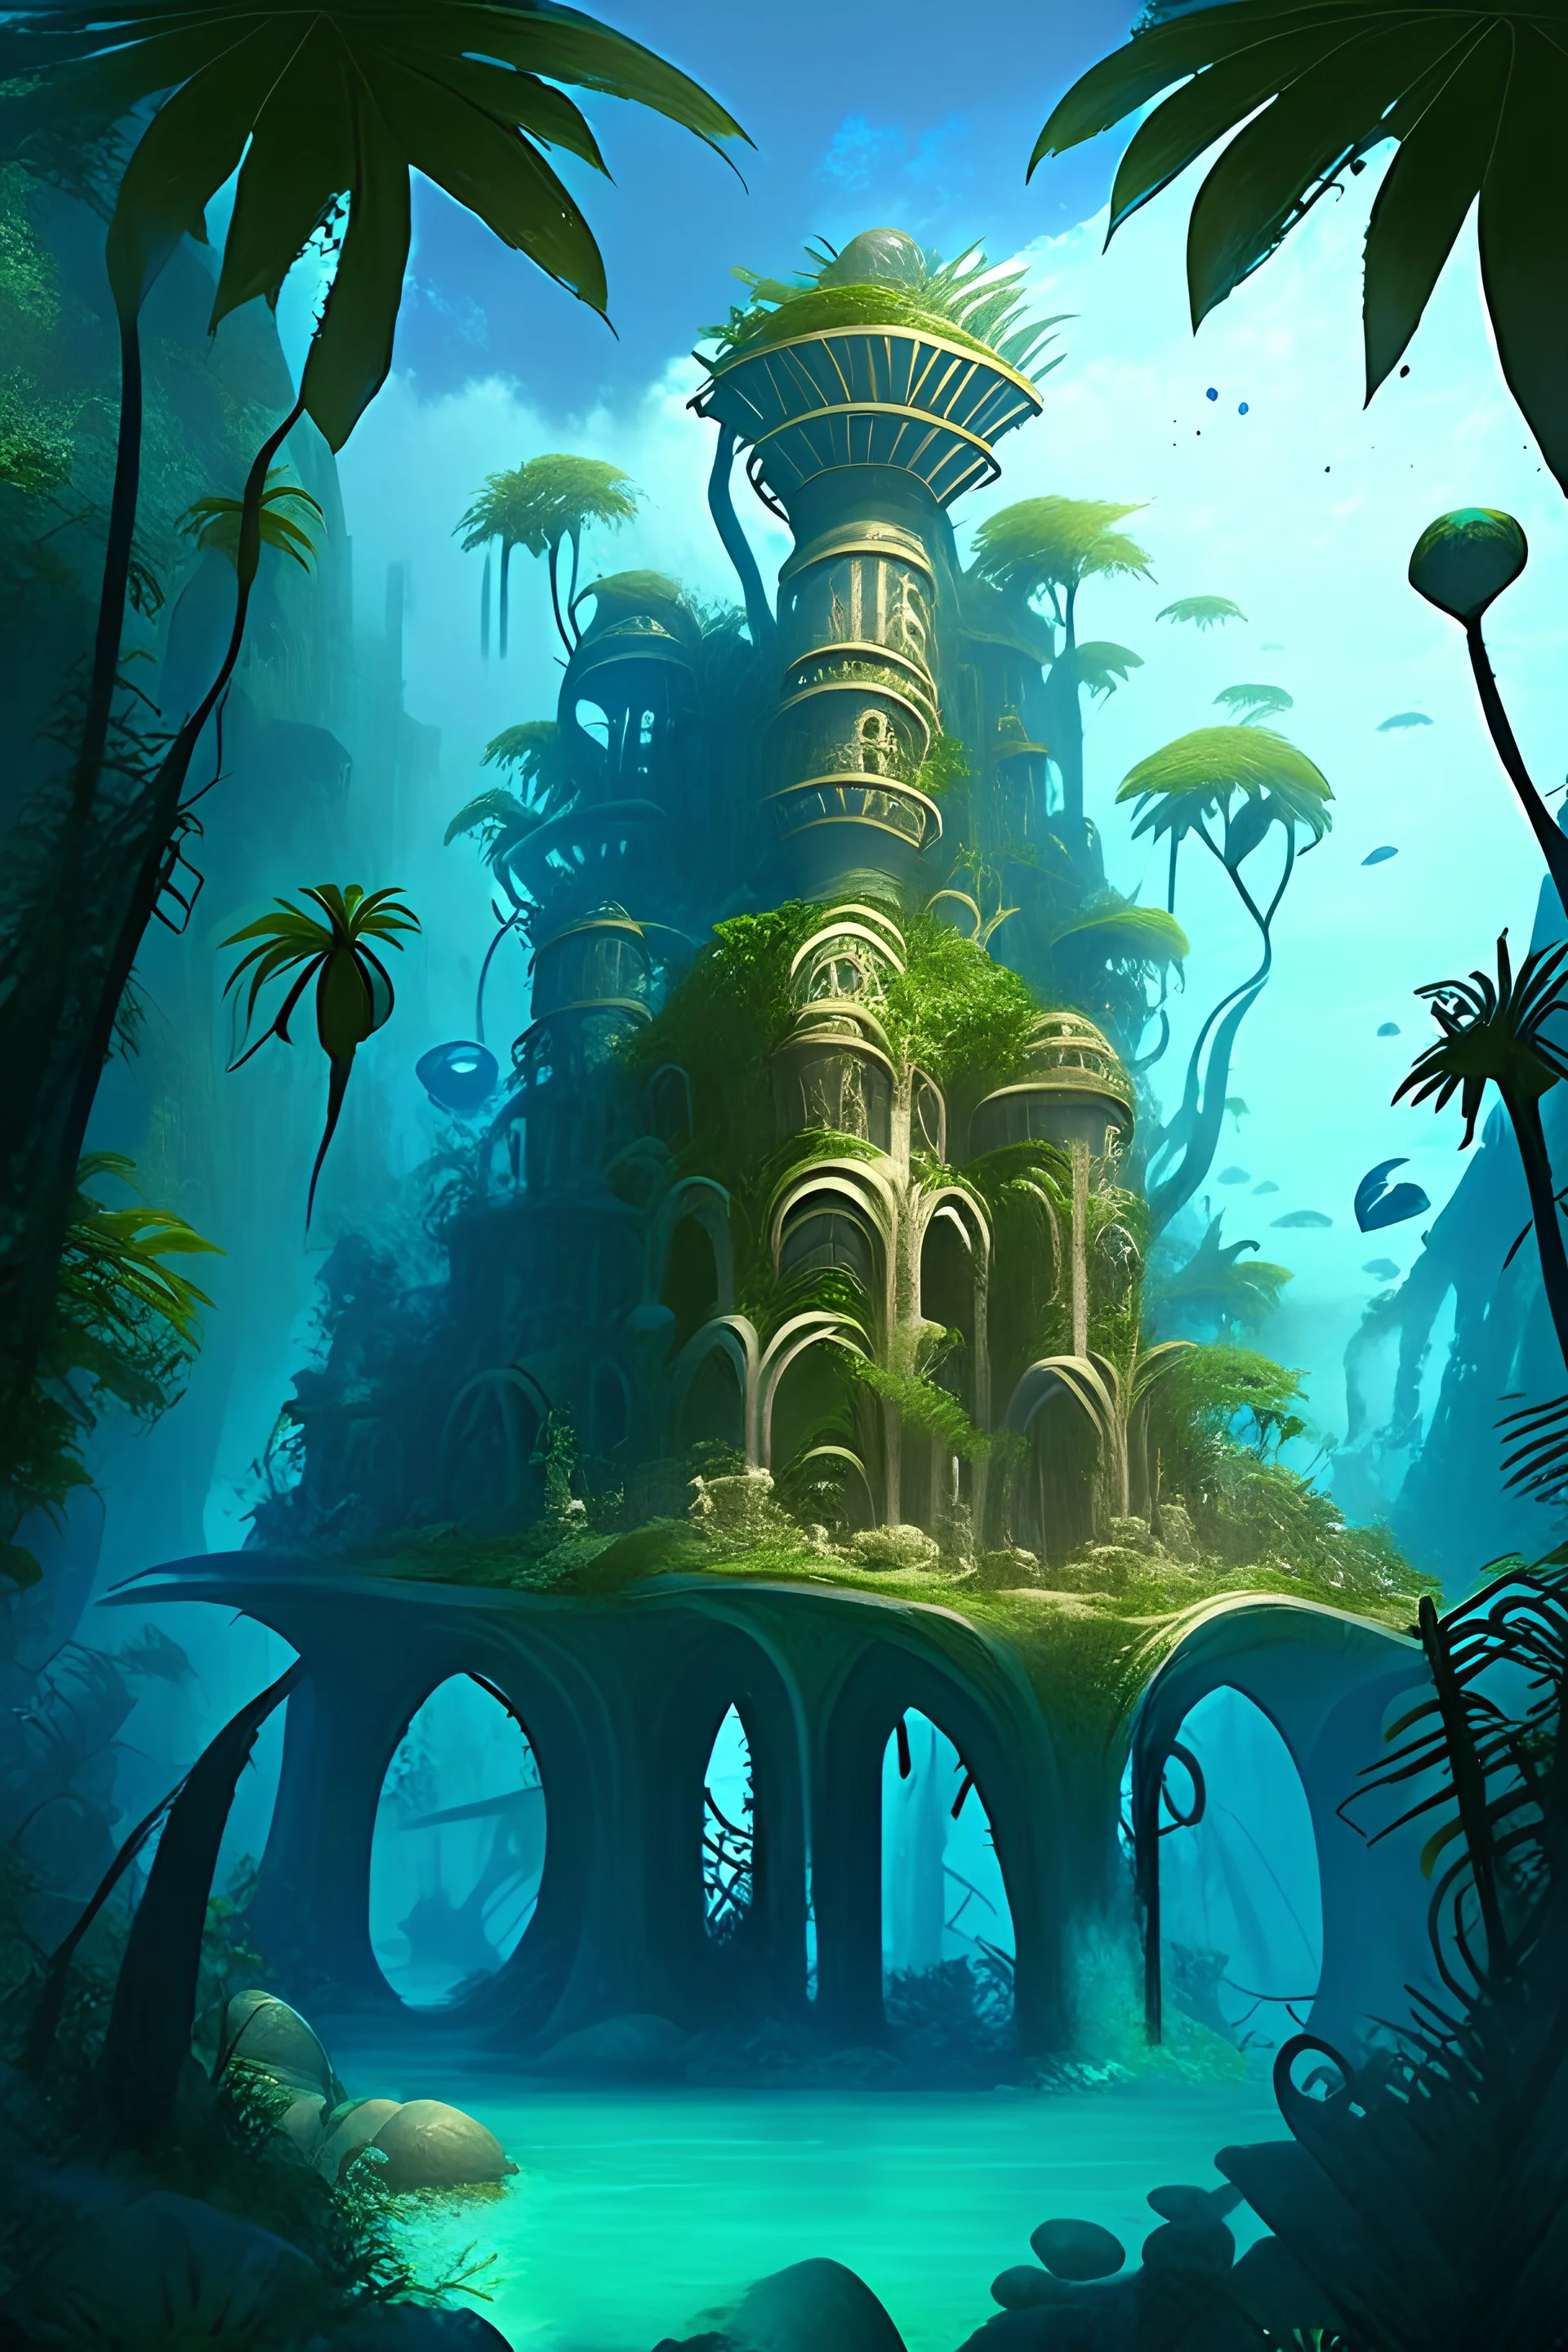 A D&D mysterious jungle island with main street leading to ruins of crumbling and ancient time worn monumental buildings, underwaterfeeling buildings built by auqutic intelligent humanoids, coral architecture, magical domes holding seawater, symbiotic arcitecture with jungle and ocean, spiral tower reminiscent of seashells, clear blue sky, ominous crumbling human settlement on the side, partly flooded and destroyed side buildings